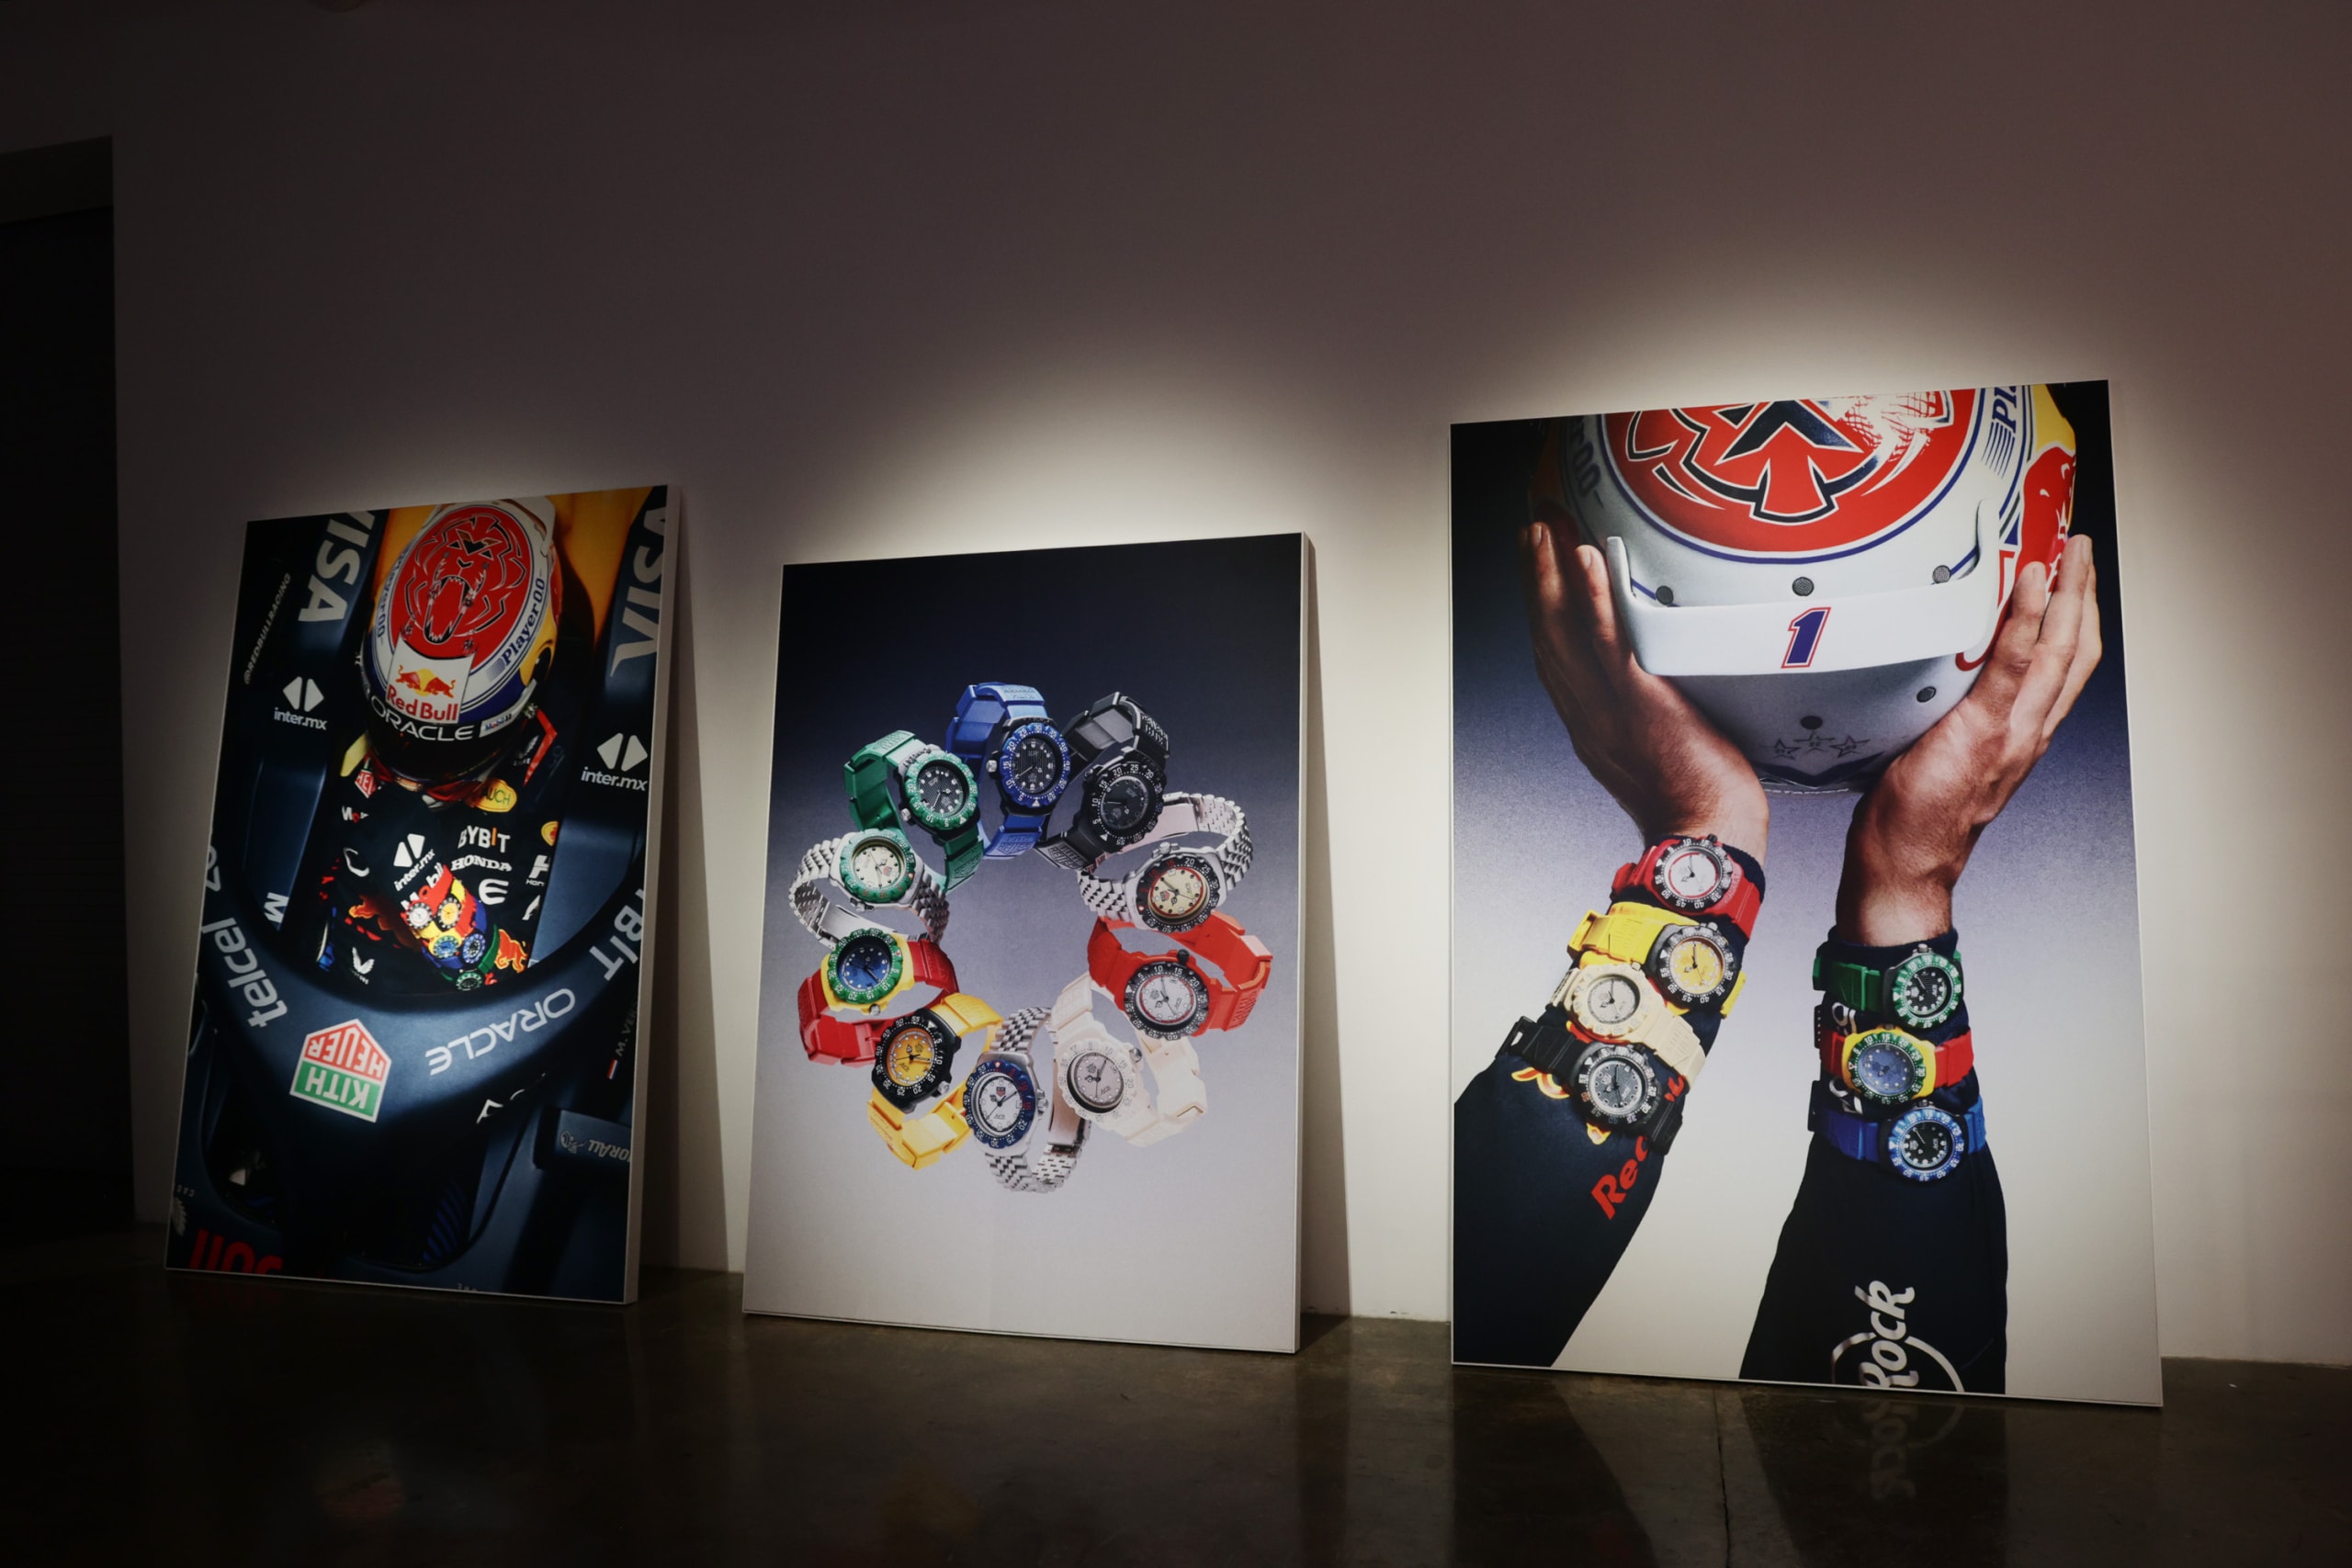 TAG Heuer x KITH Celebrate the Re-Launch of the Formula 1 Model in Miami During the Grand Prix